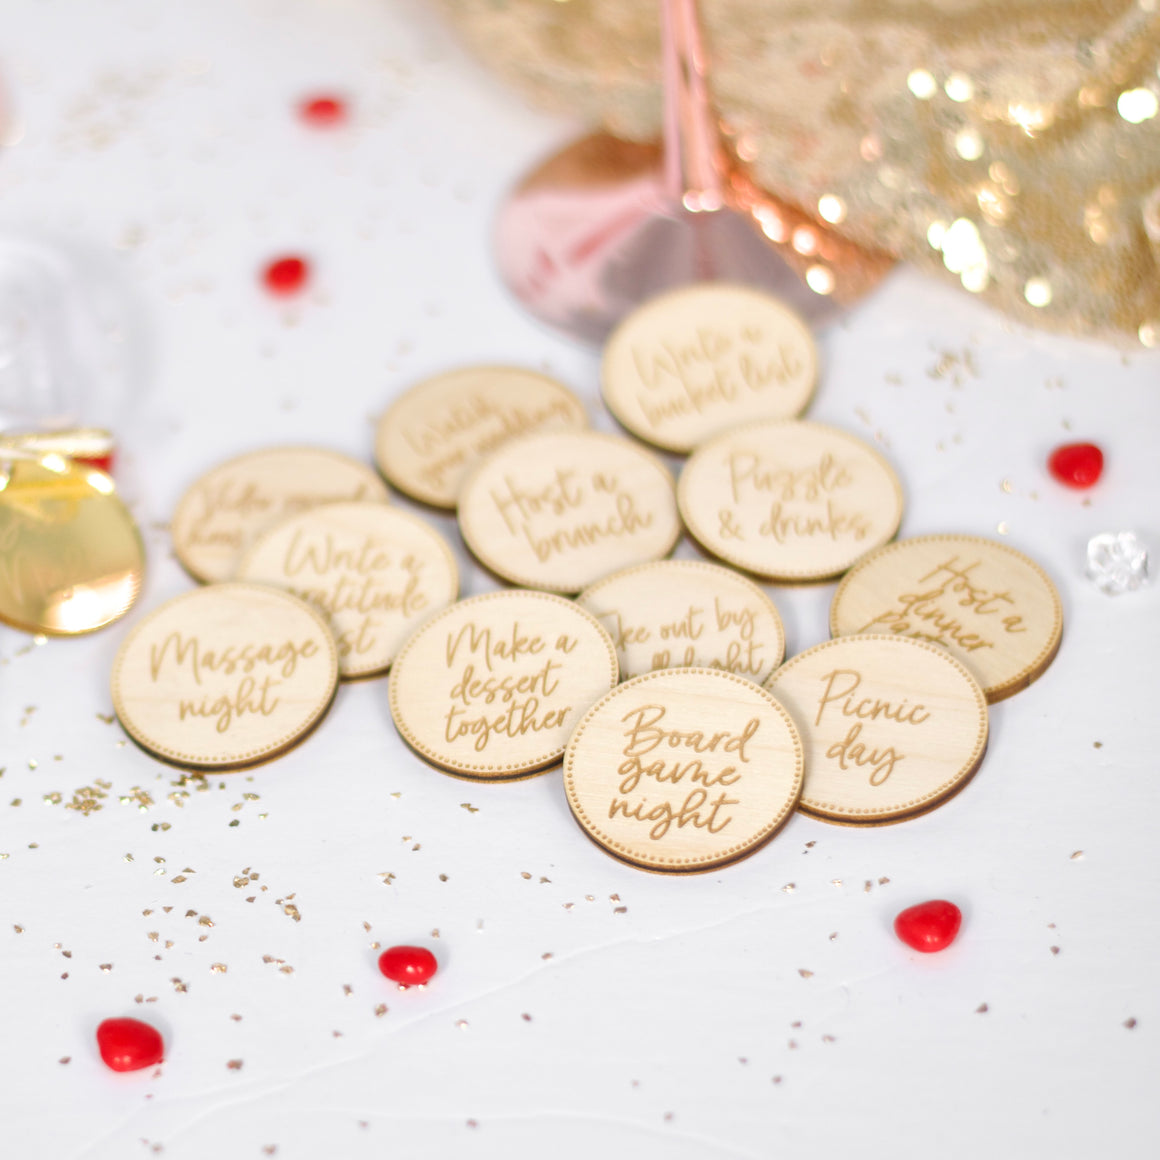 Date Night Tokens for Valentine's Day Gifts for Her